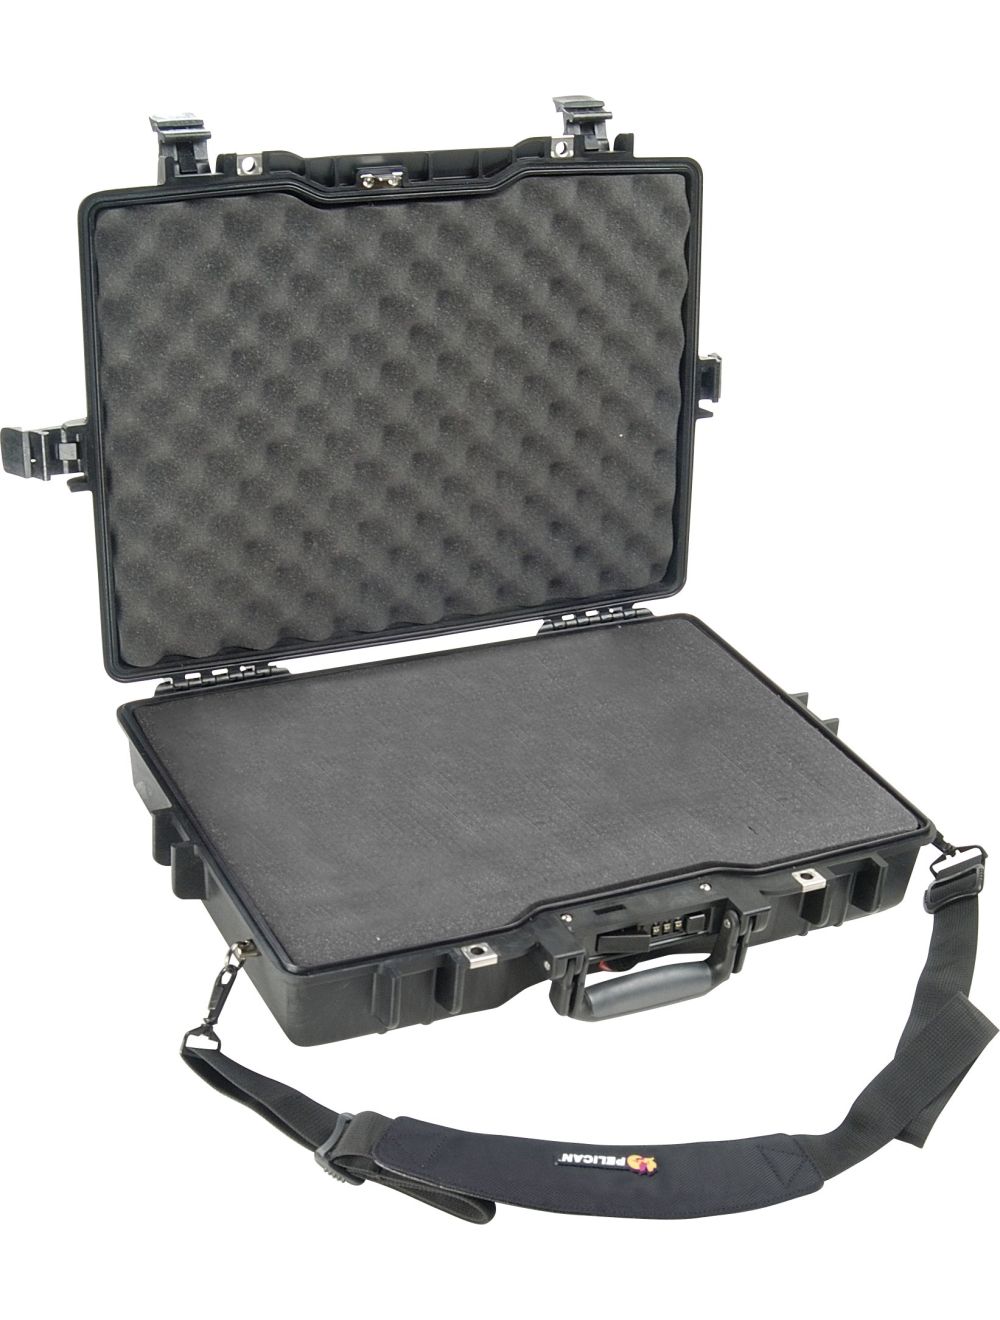 1495 Protector Laptop Case